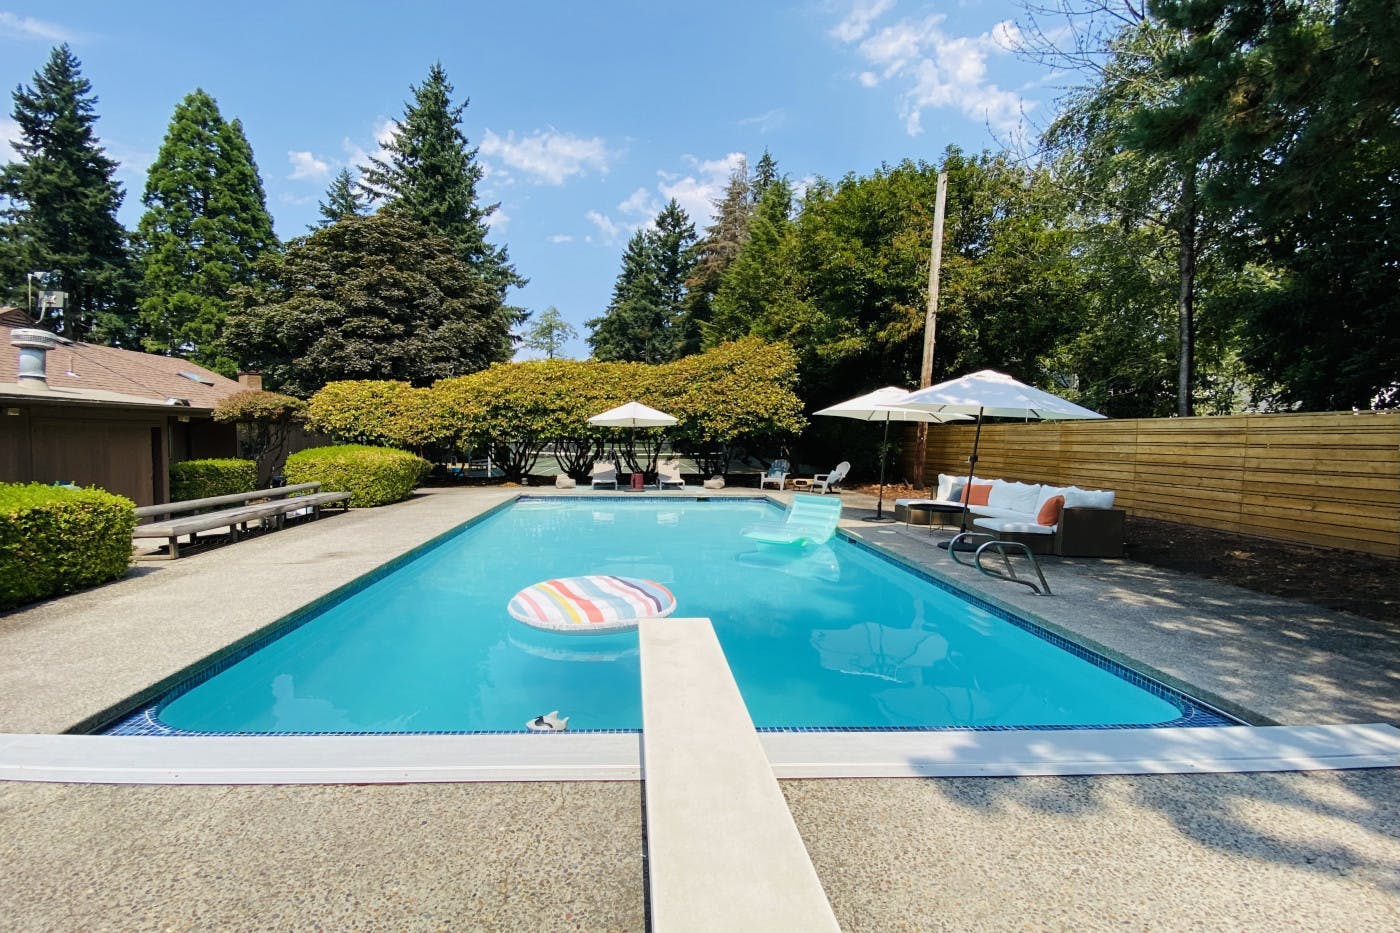 Urban Oasis - Heated pool in SW Portland with Amenities